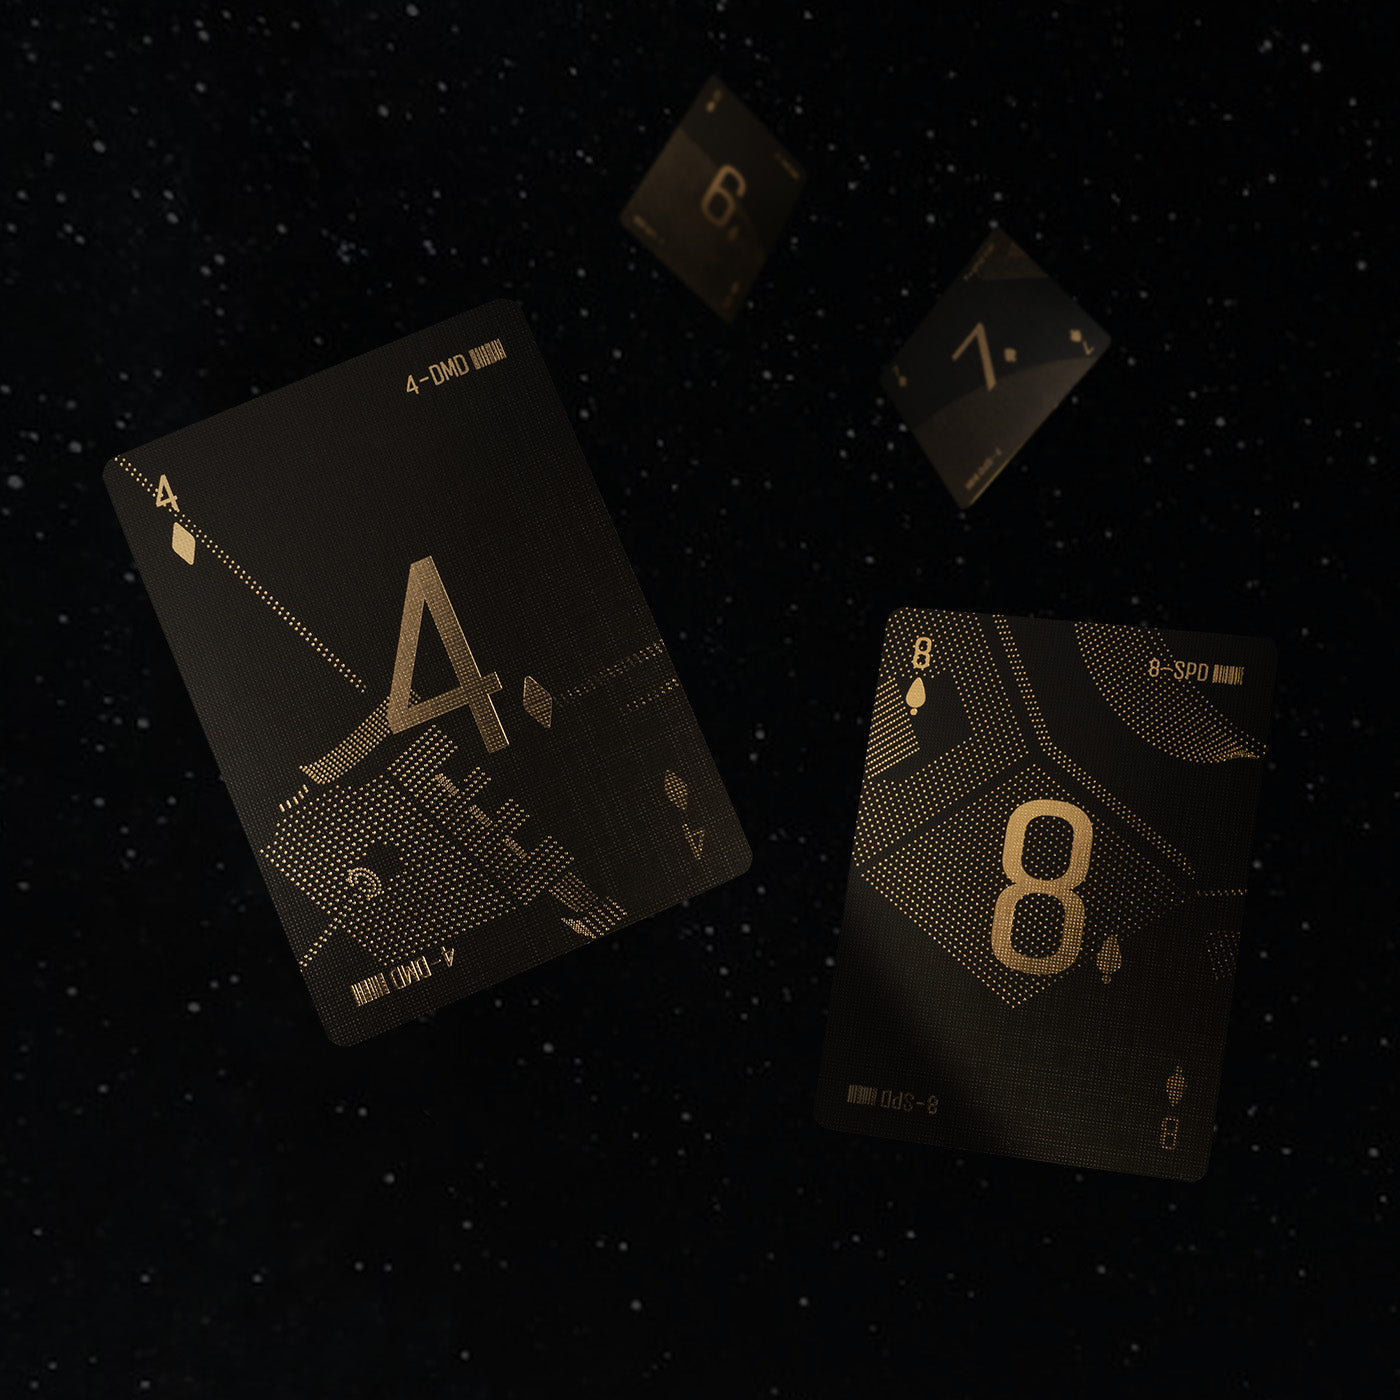 Four playing cards floating in space